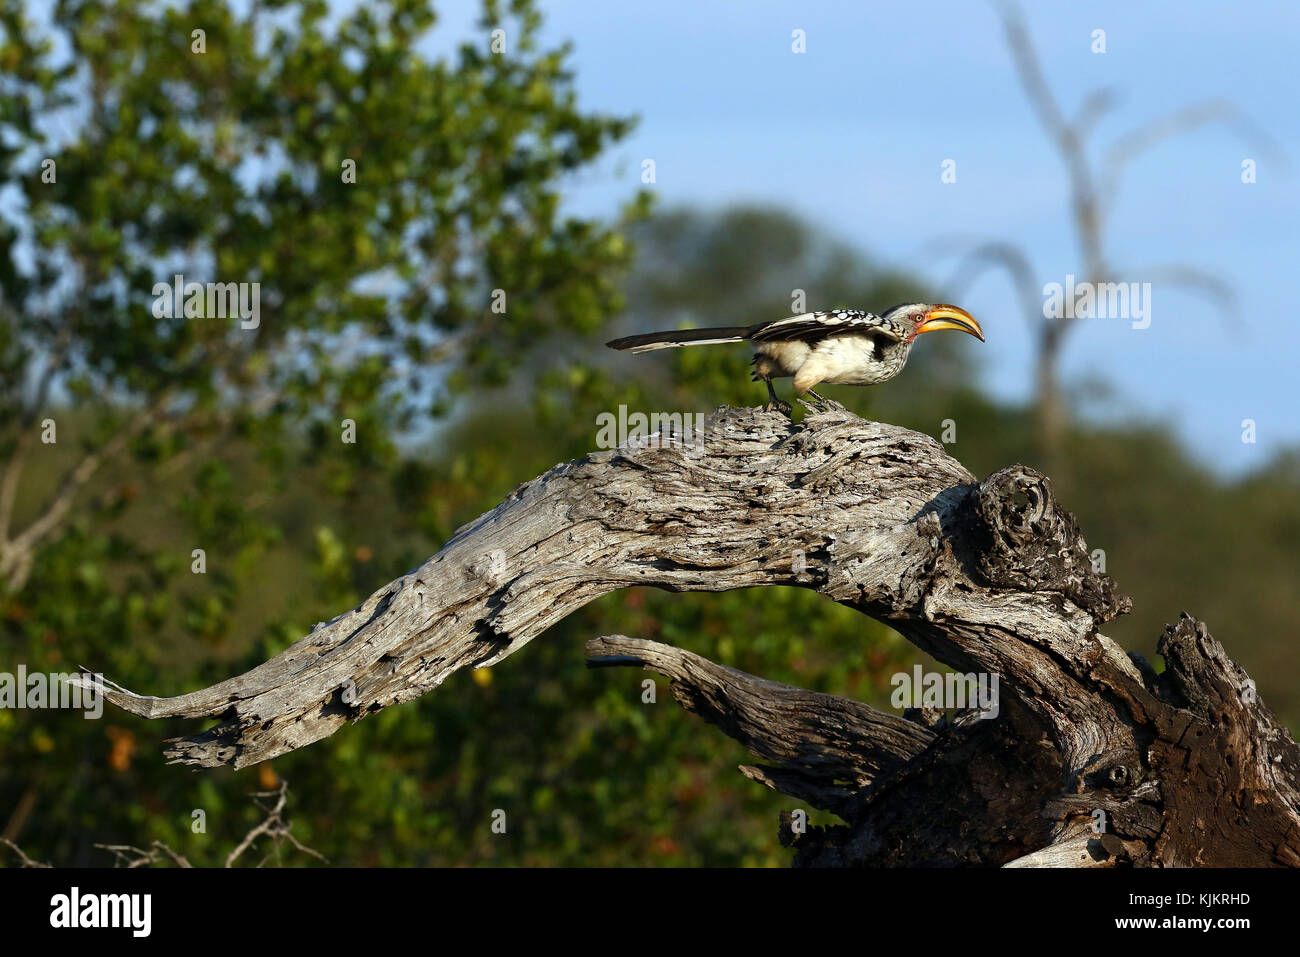 Kruger National Park.  A southern yellow-billed hornbill (Tockus leucomelas). South Africa. Stock Photo